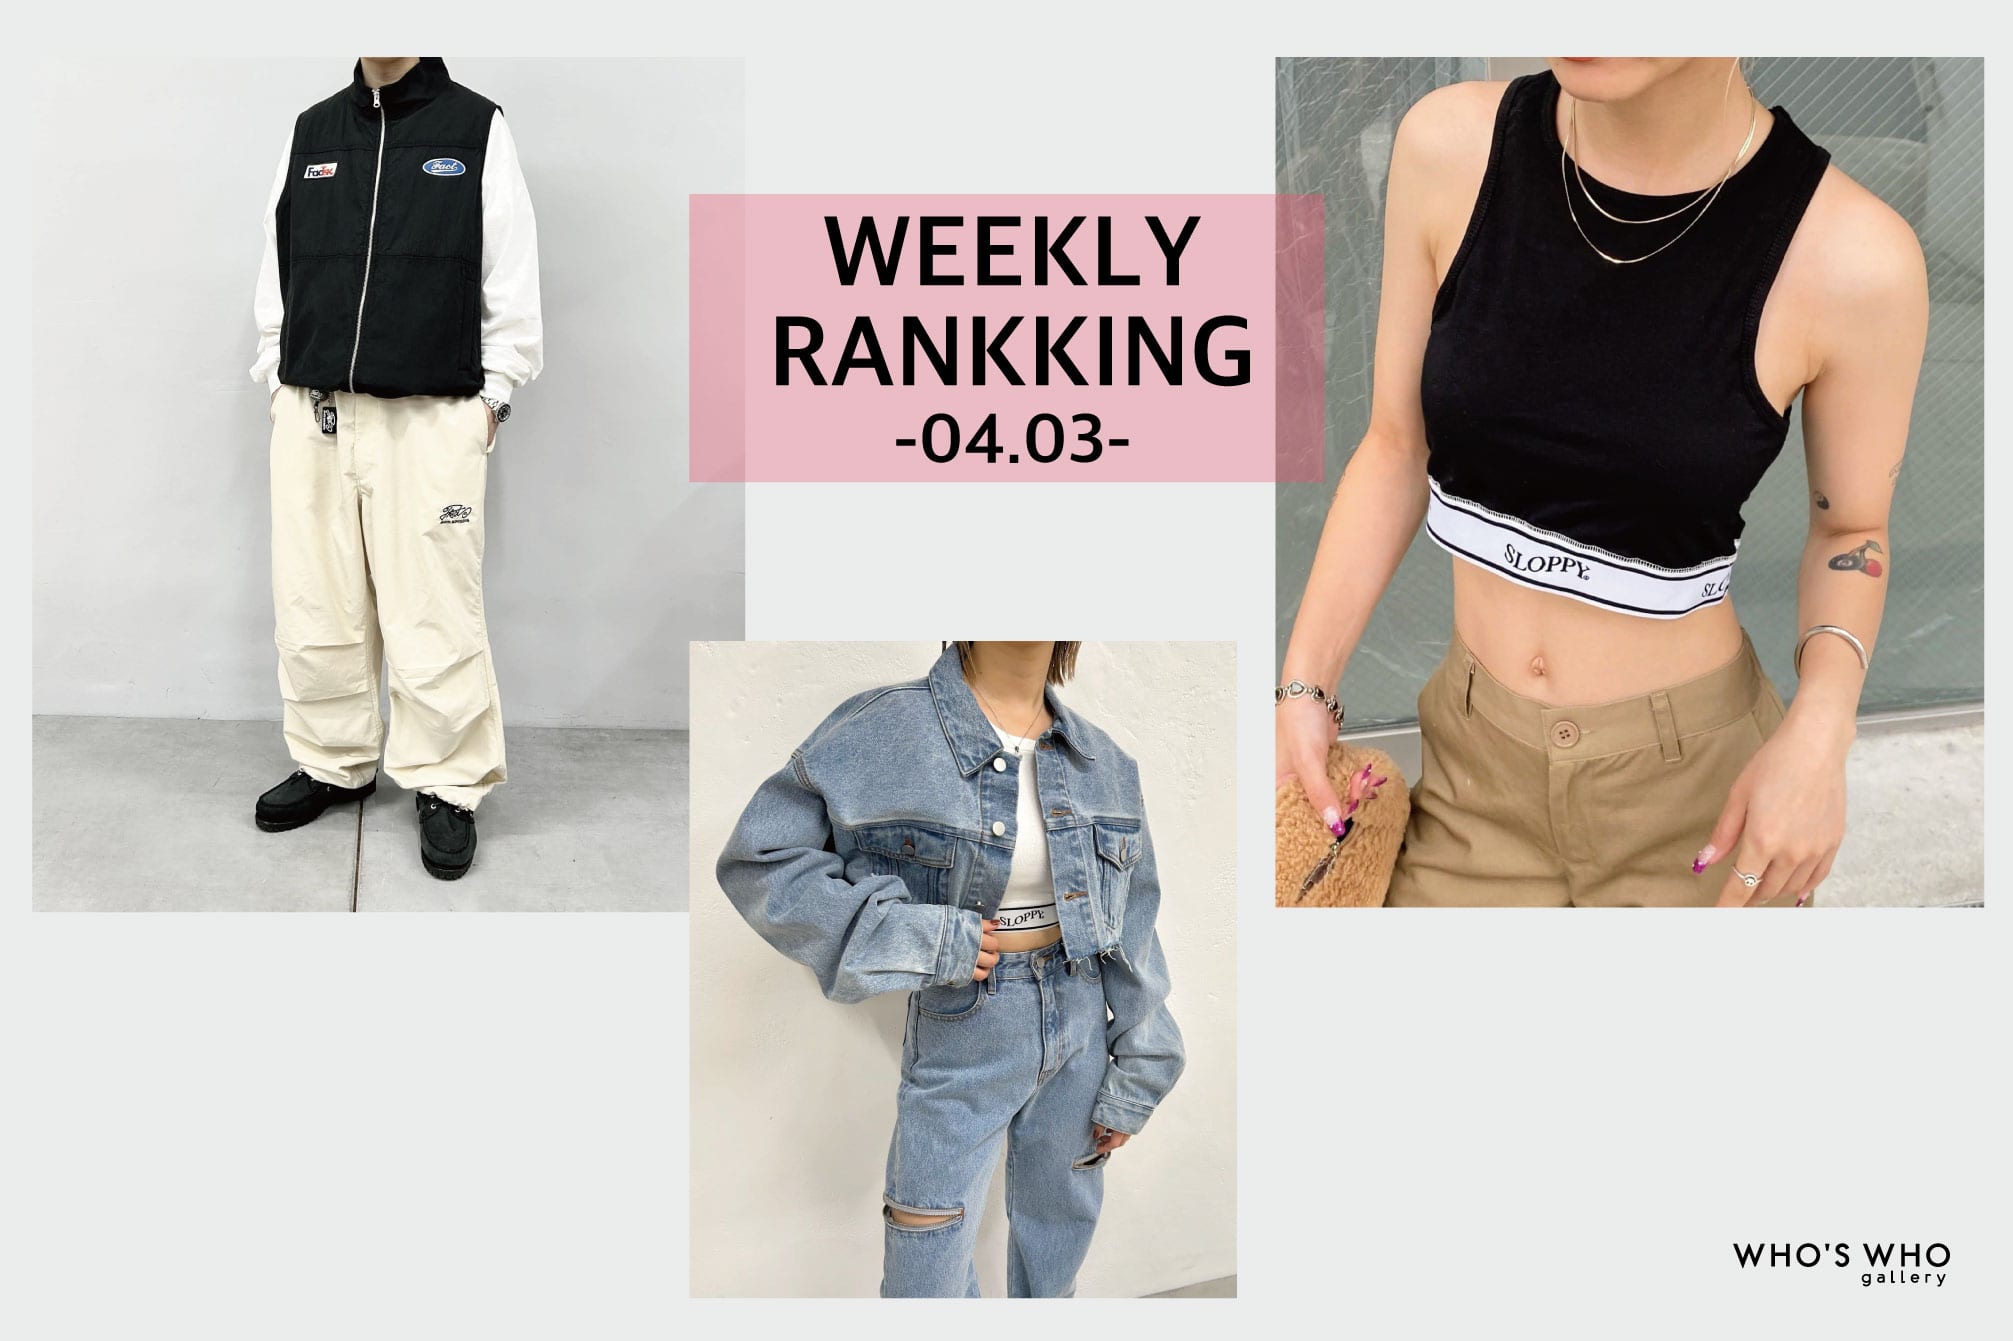 WHO’S WHO gallery 【WEEKLY RANKING -04.03-】